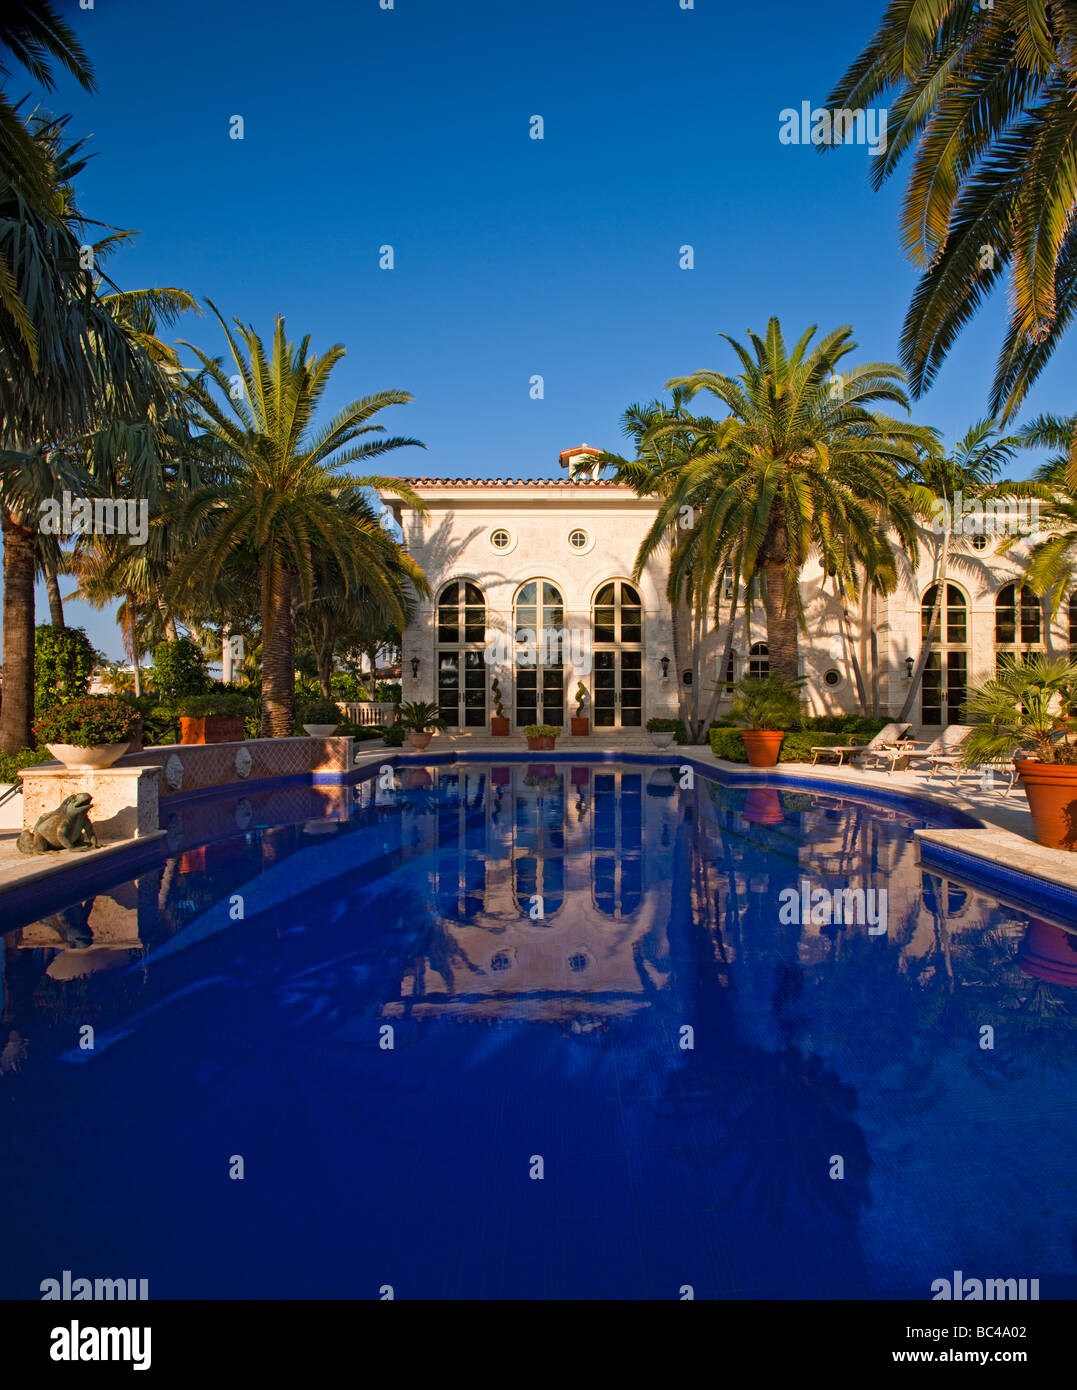 A luxurious pool at a mansion in Boca Raton, Florida Stock Photo